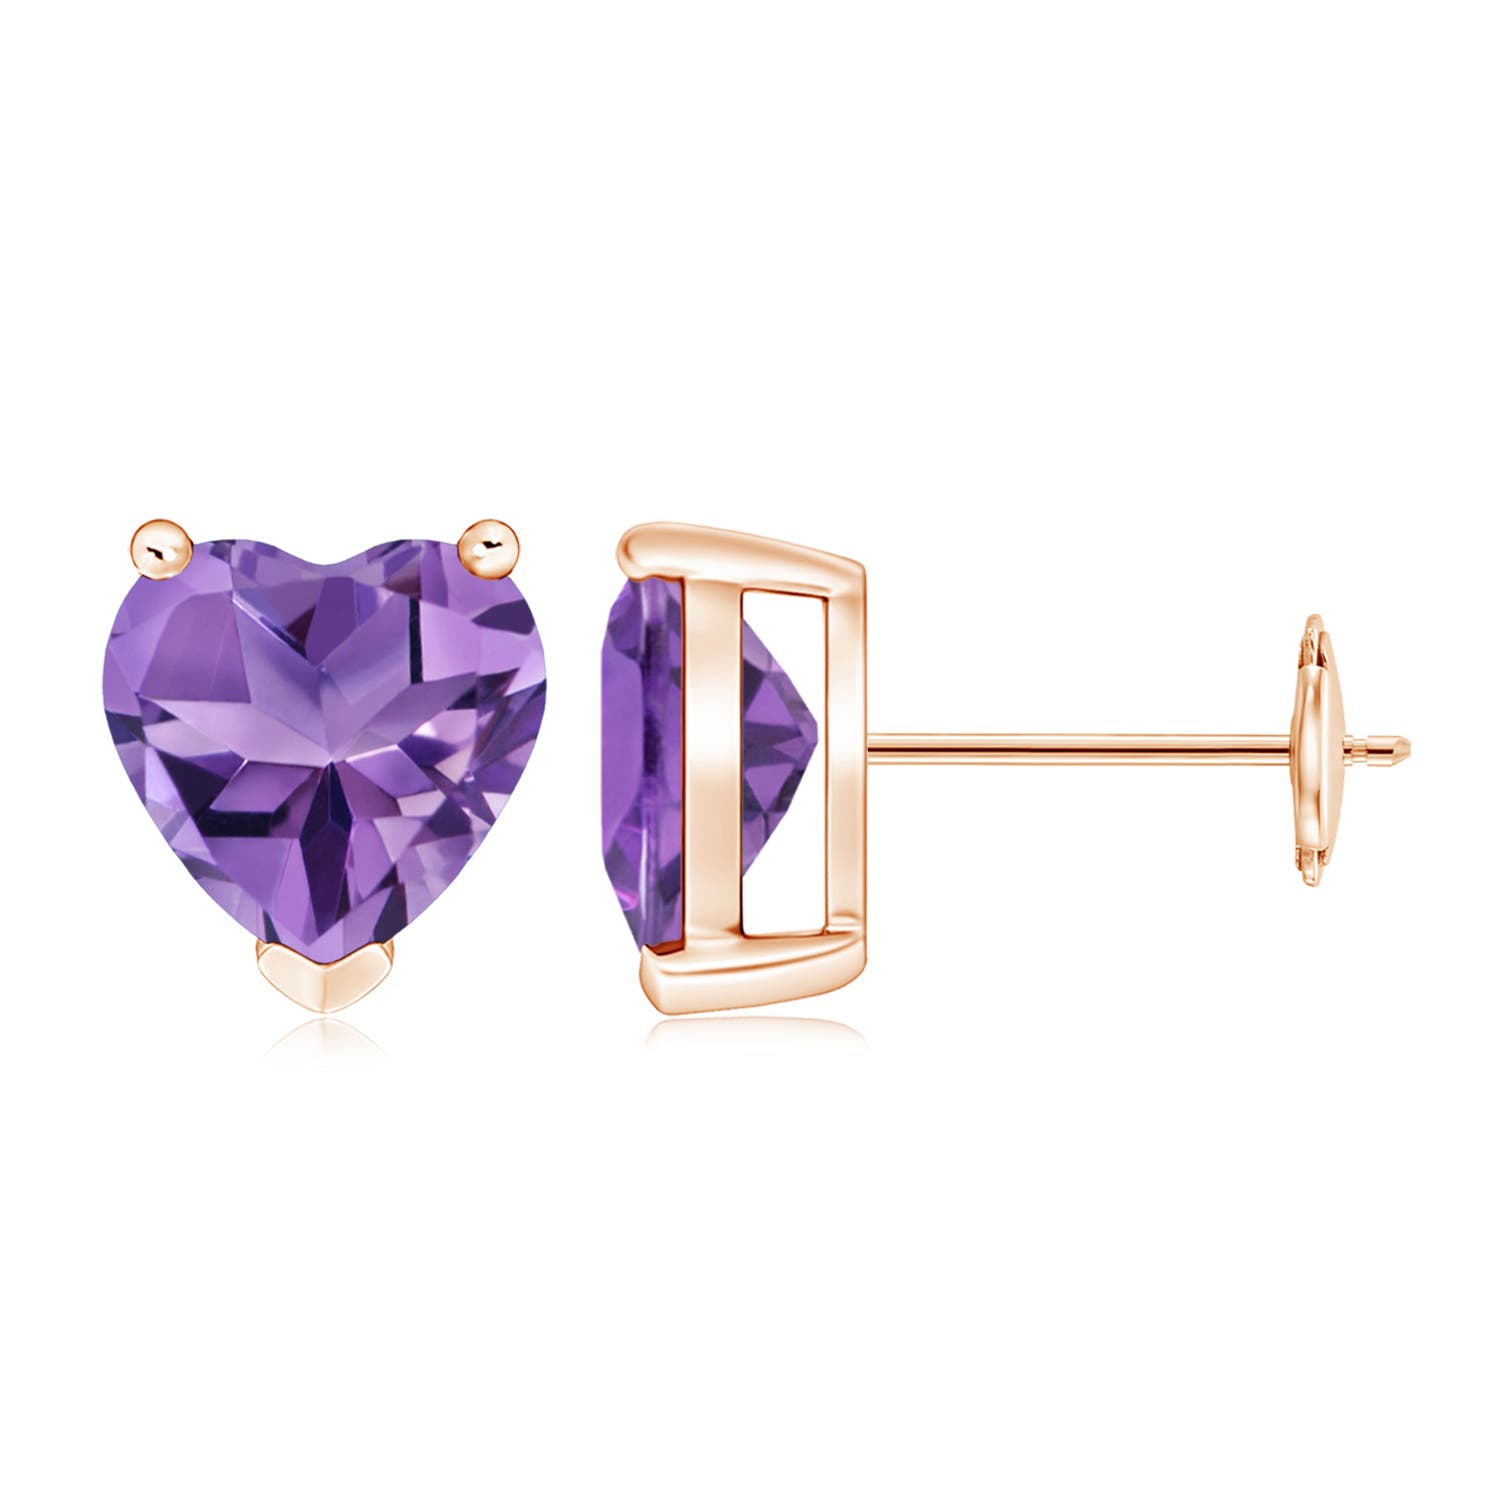 AA - Amethyst / 3 CT / 14 KT Rose Gold